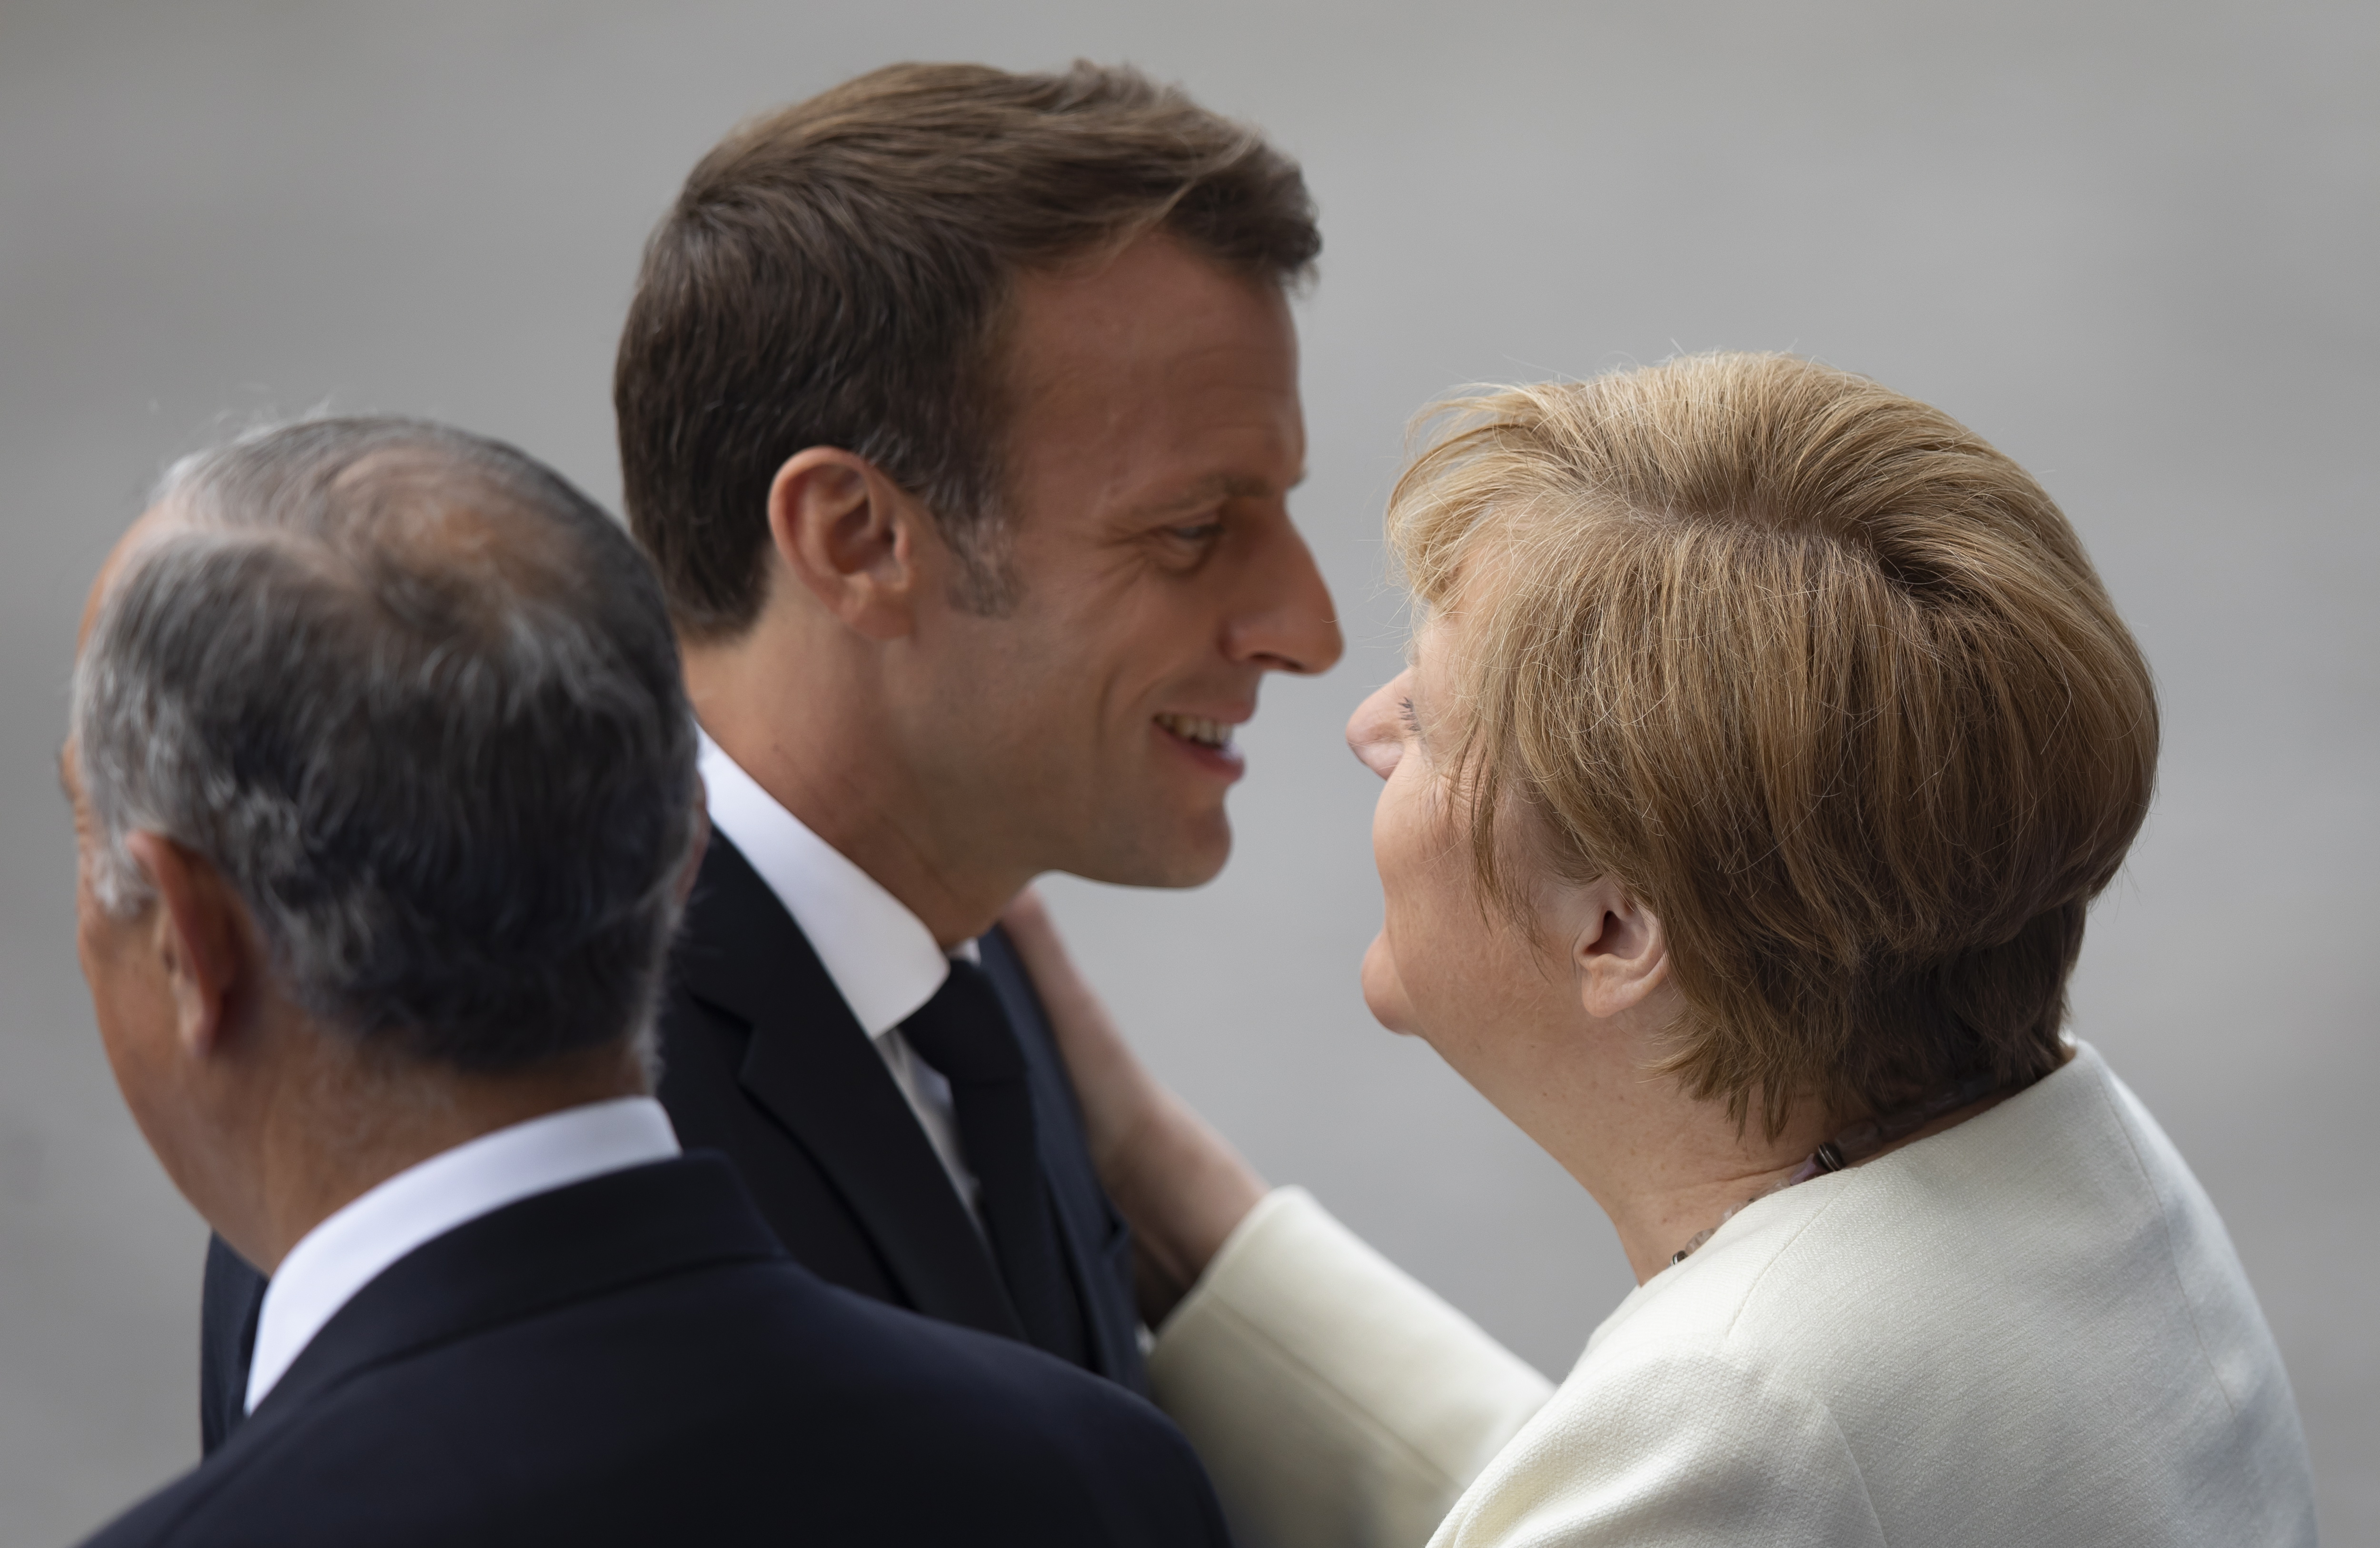 epa07716164 French President Emmanuel Macron (C) embraces German Chancellor Angela Merkel (R) as they attend the annual Bastille Day military parade on the Champs Elysees avenue in Paris, France, 14 July 2019 Bastille Day, the French National Day, is held annually on 14 July to commemorate the storming of the Bastille fortress in 1789.  EPA/IAN LANGSDON